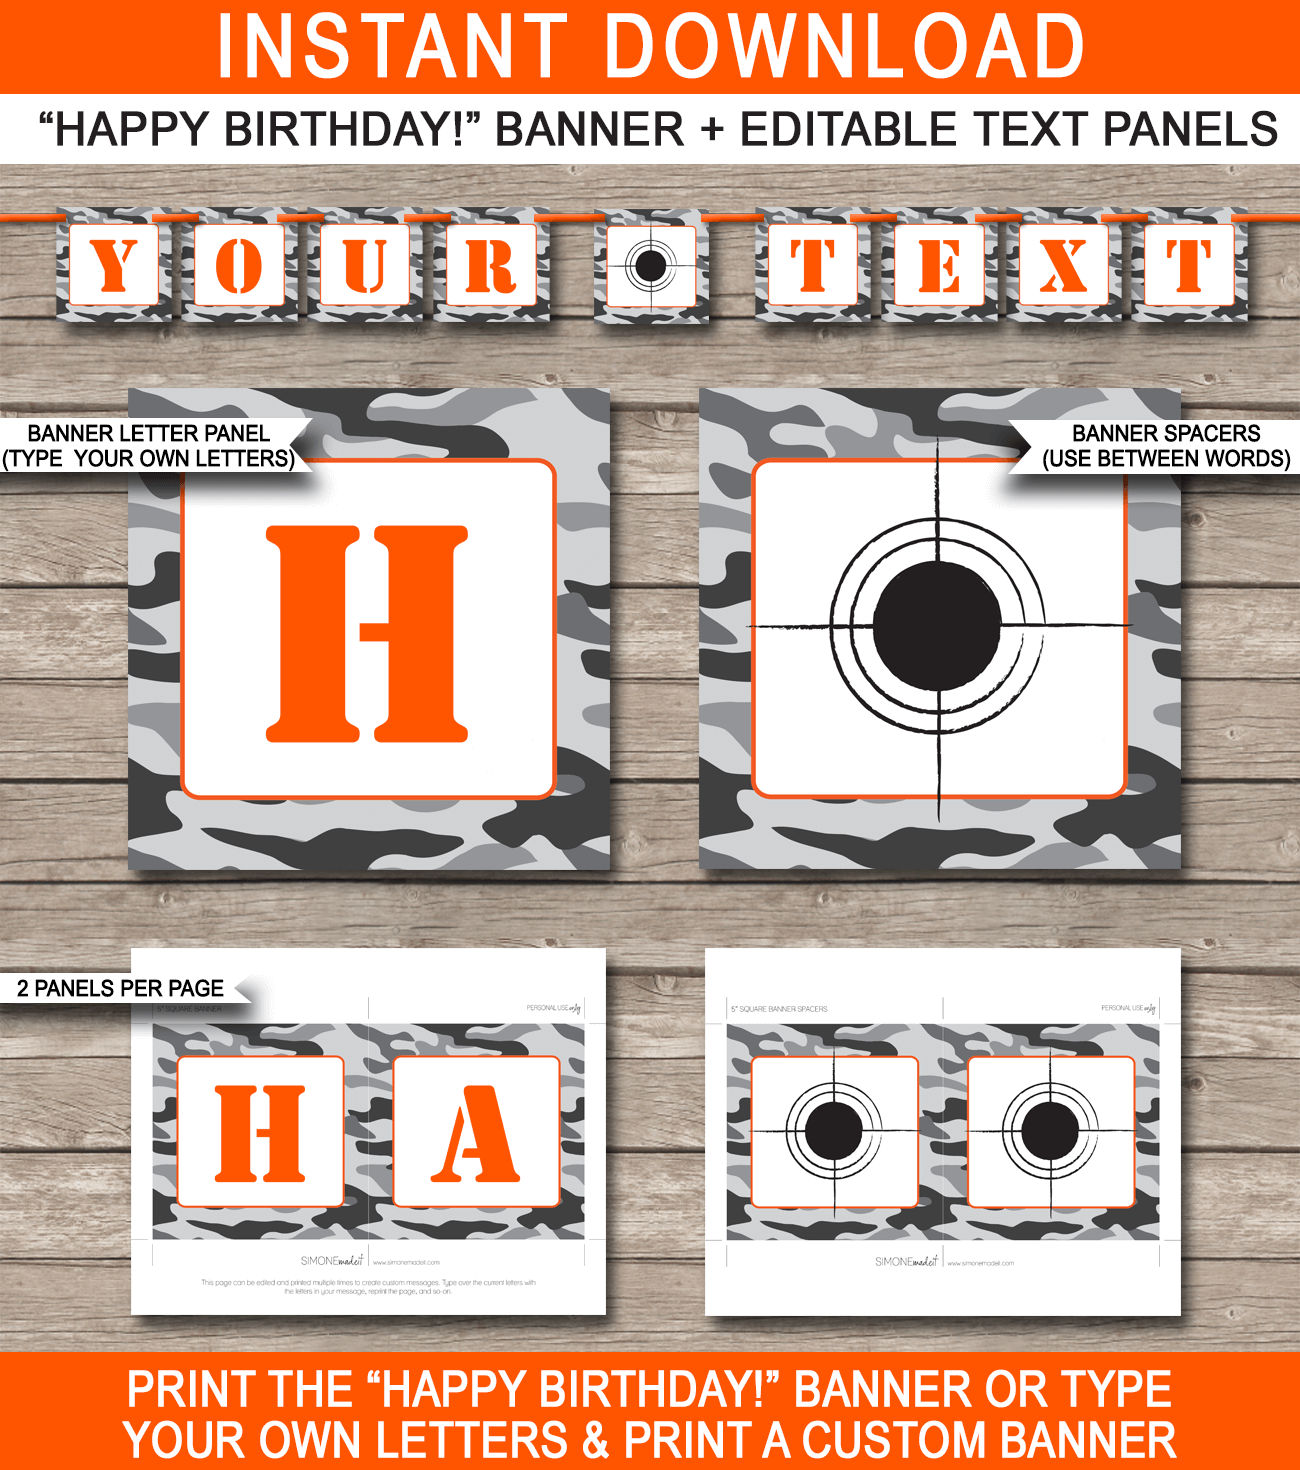 Nerf Party Banner Template - Nerf Bunting - Happy Birthday Banner - Gray Camo - Birthday Party - Editable and Printable DIY Template - INSTANT DOWNLOAD $4.50 via simonemadeit.com